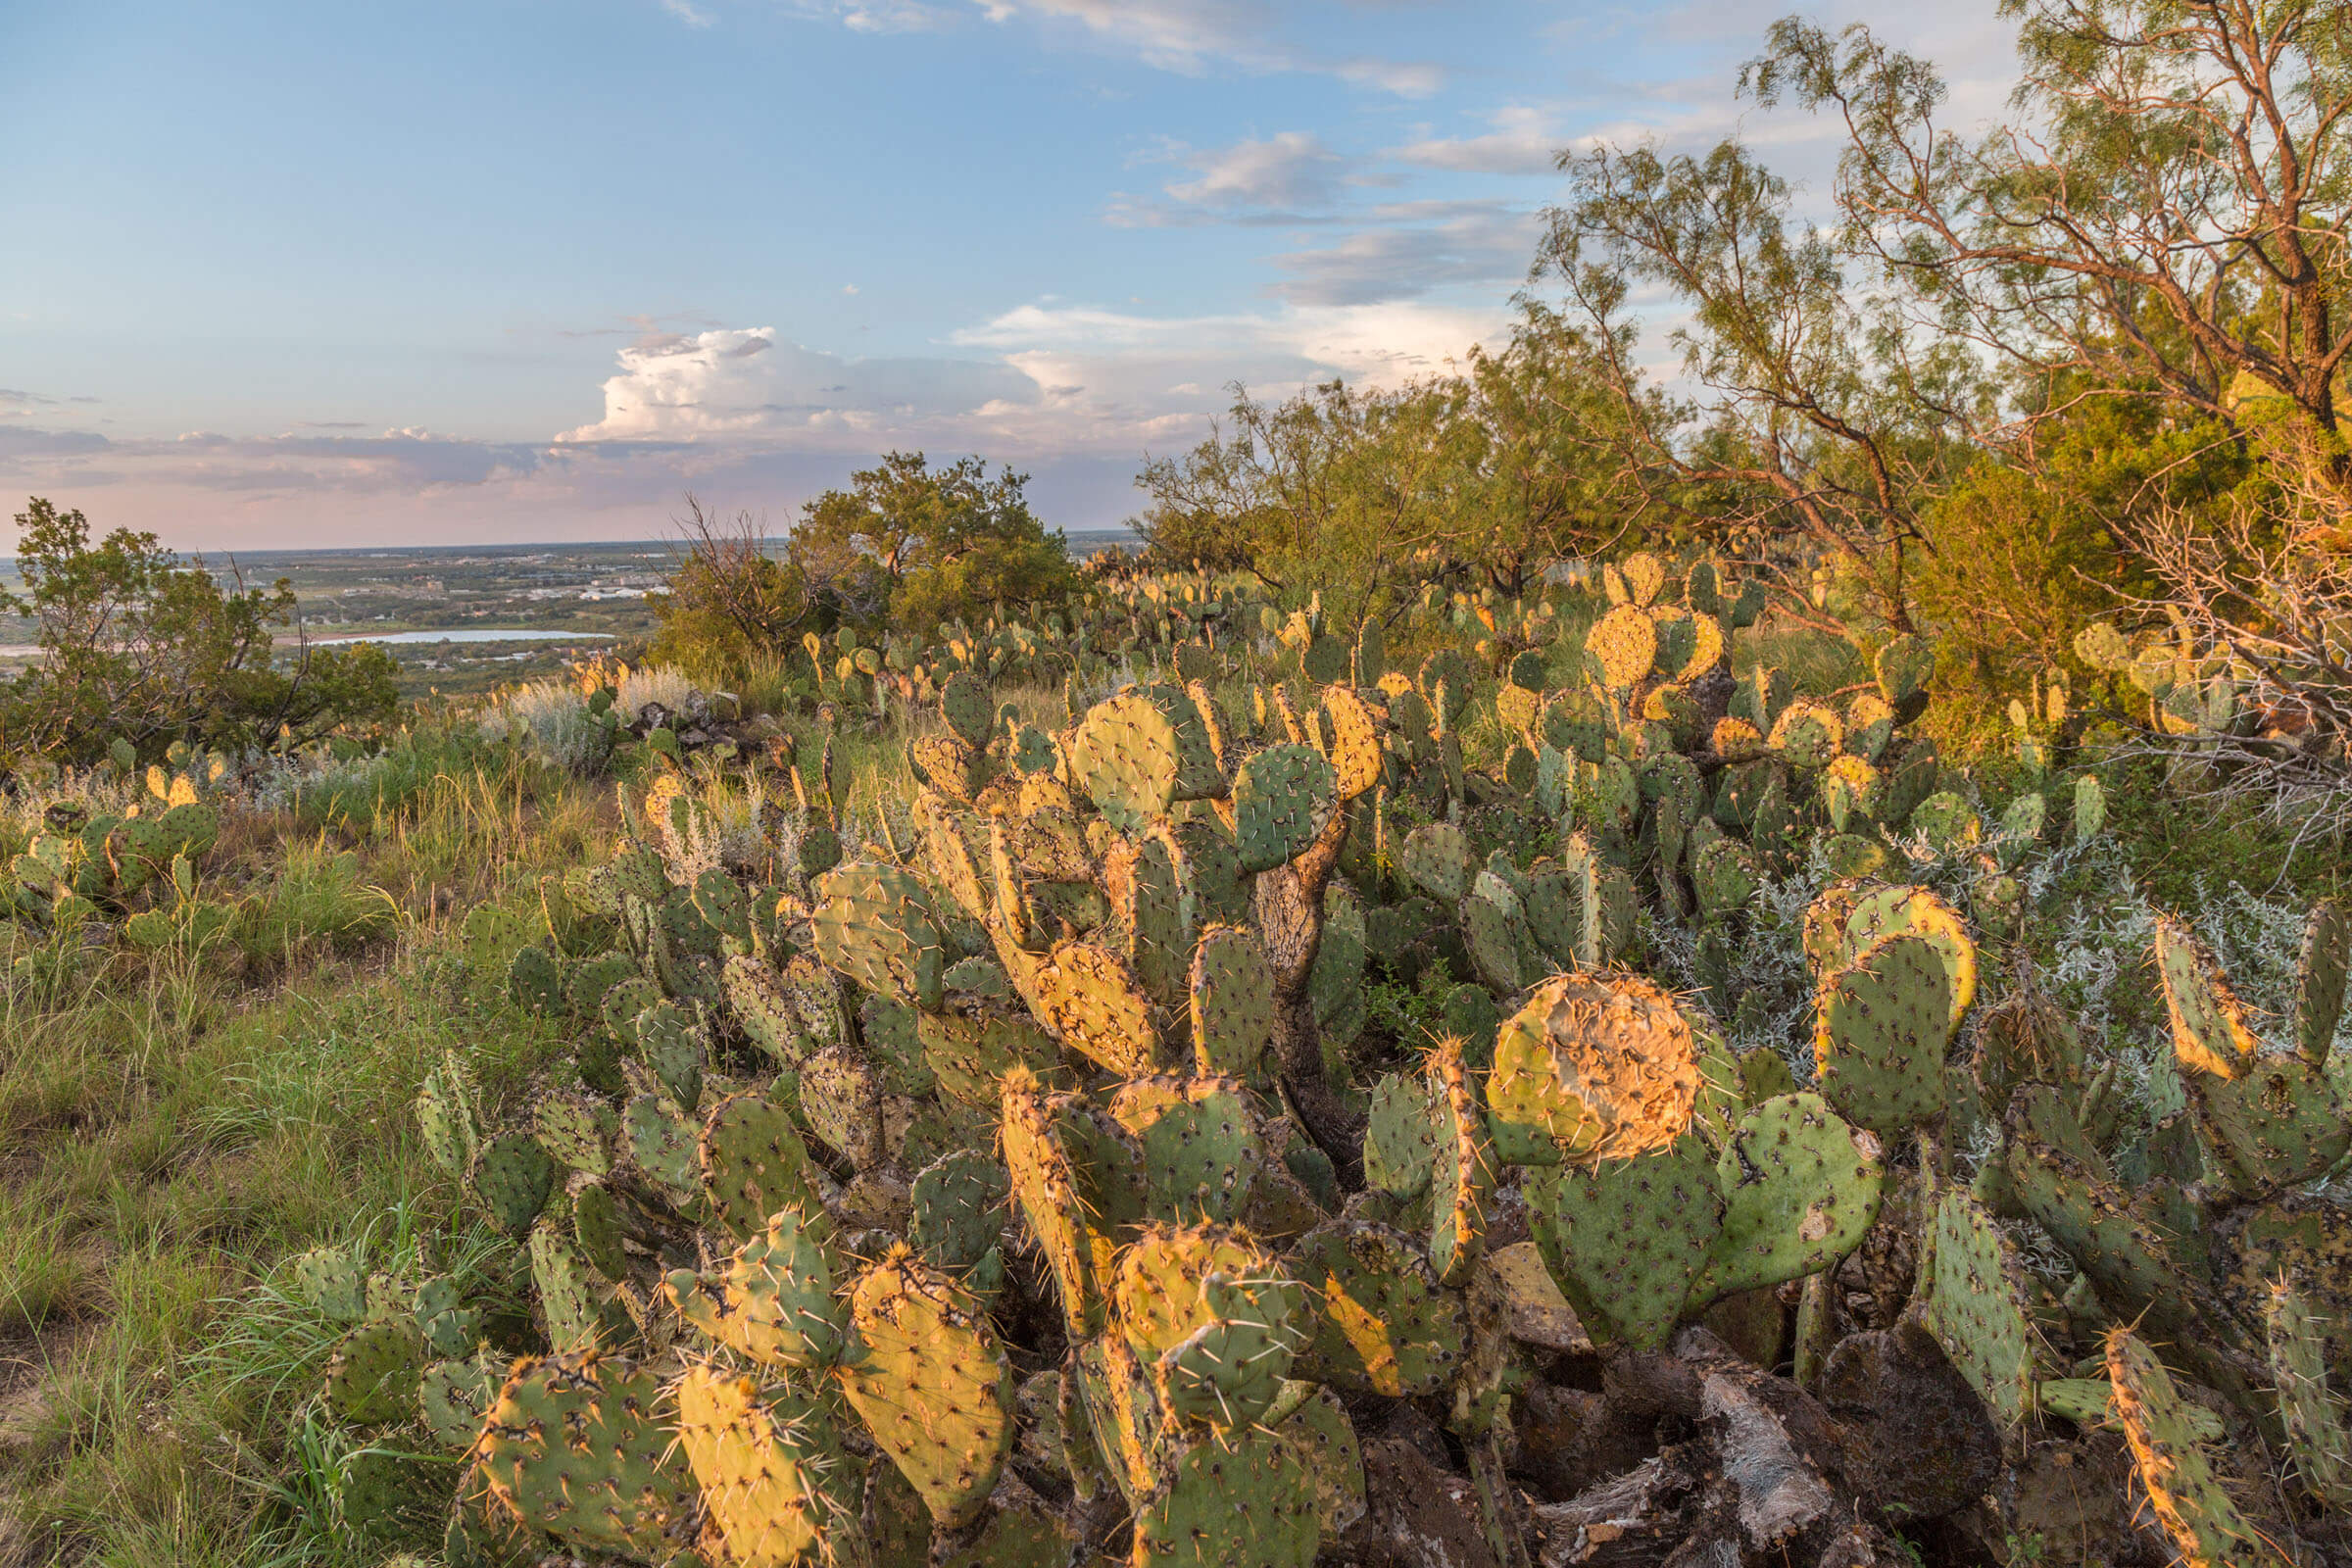 A field of prickly pear cacti on the side of a hill under blue sky